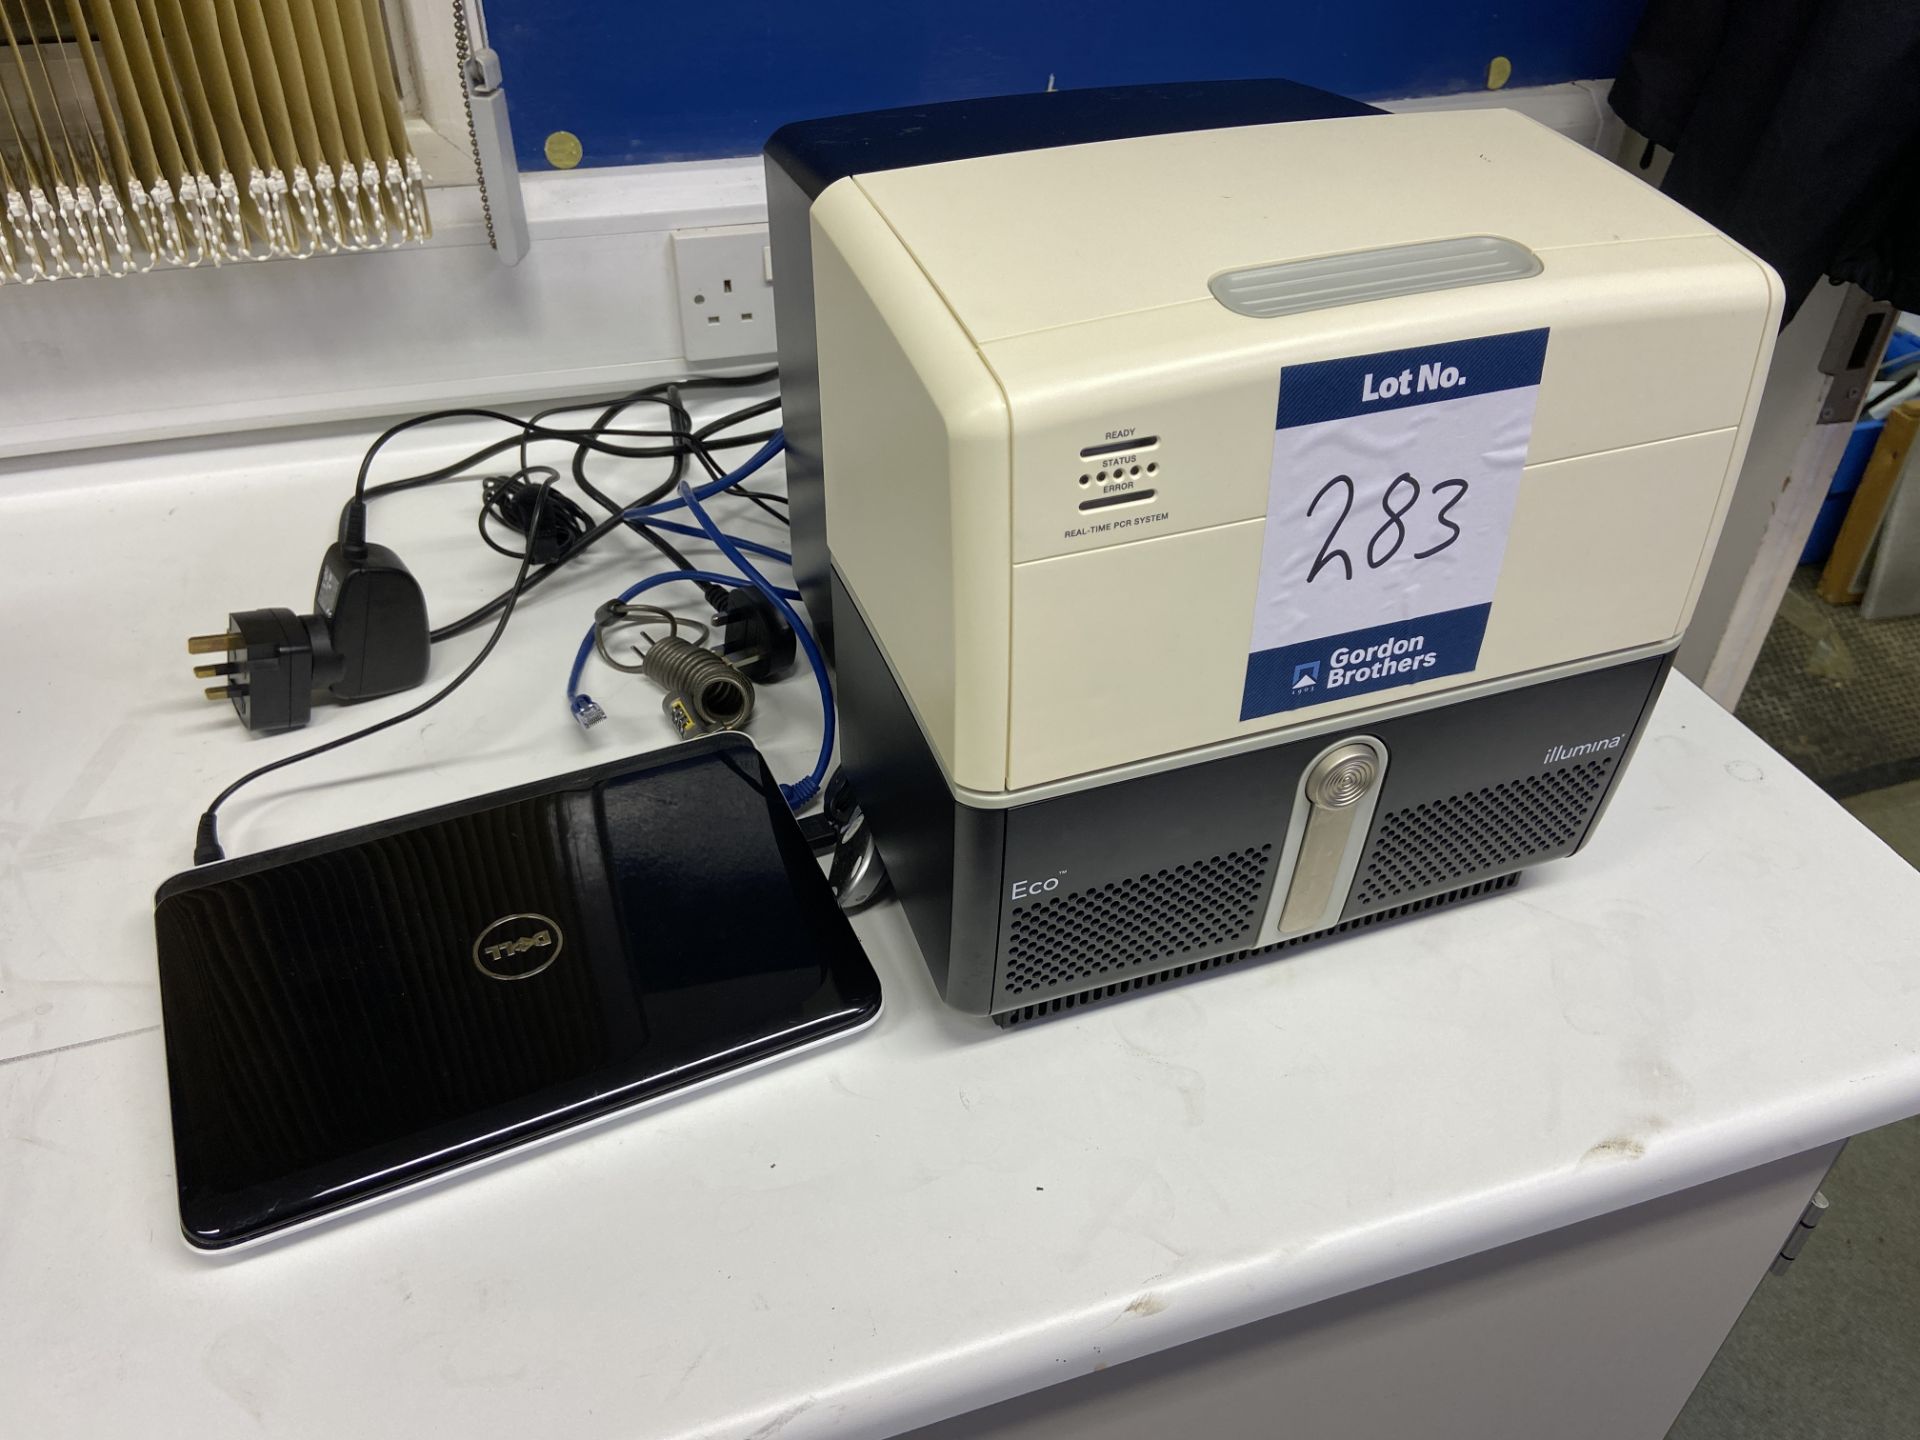 Illumina Eco Realtime PCR system (no power cable), Serial No. 08181067 complete with Dell Inspiron